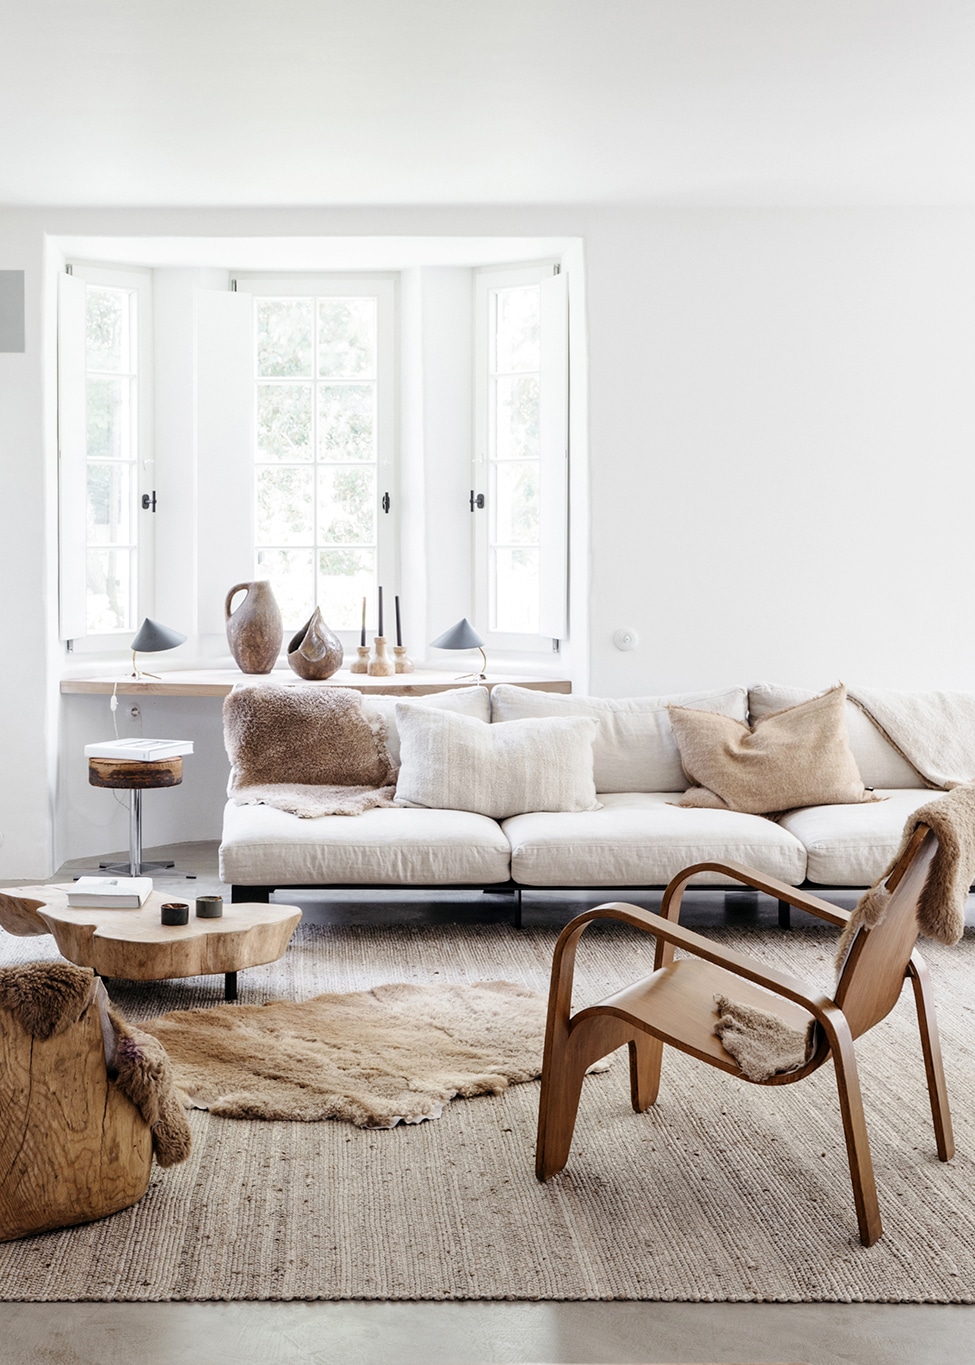 layered furs and whites in this cozy living room